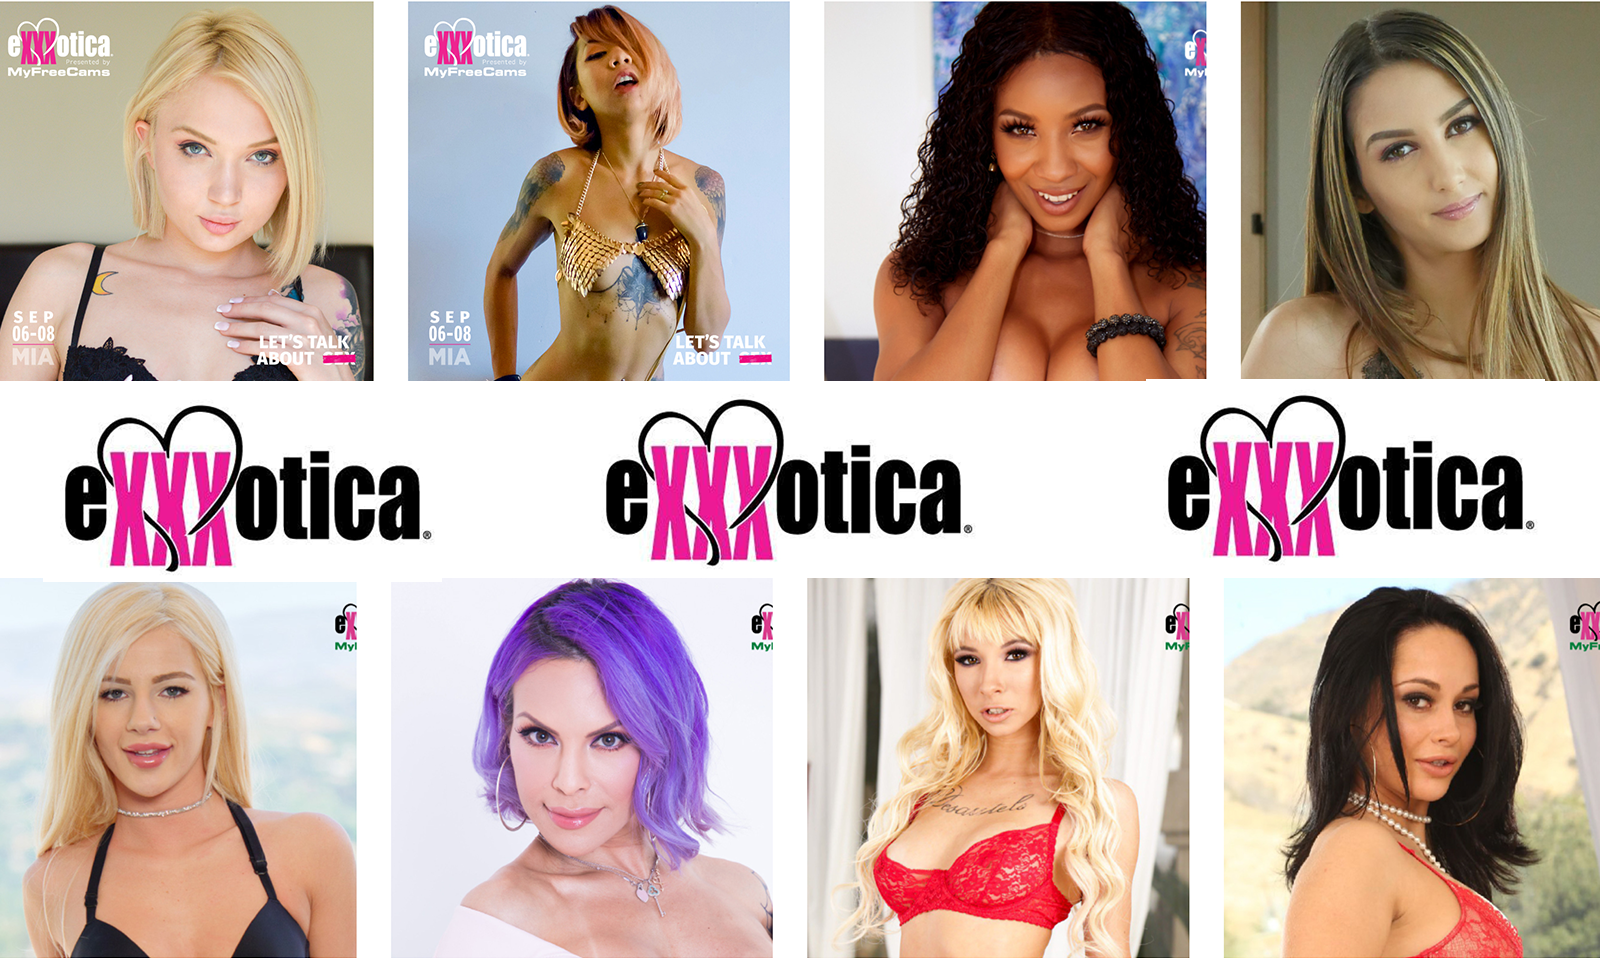 Galaxy Publicity Hosting Lots of Stars at eXXXotica Expo Miami